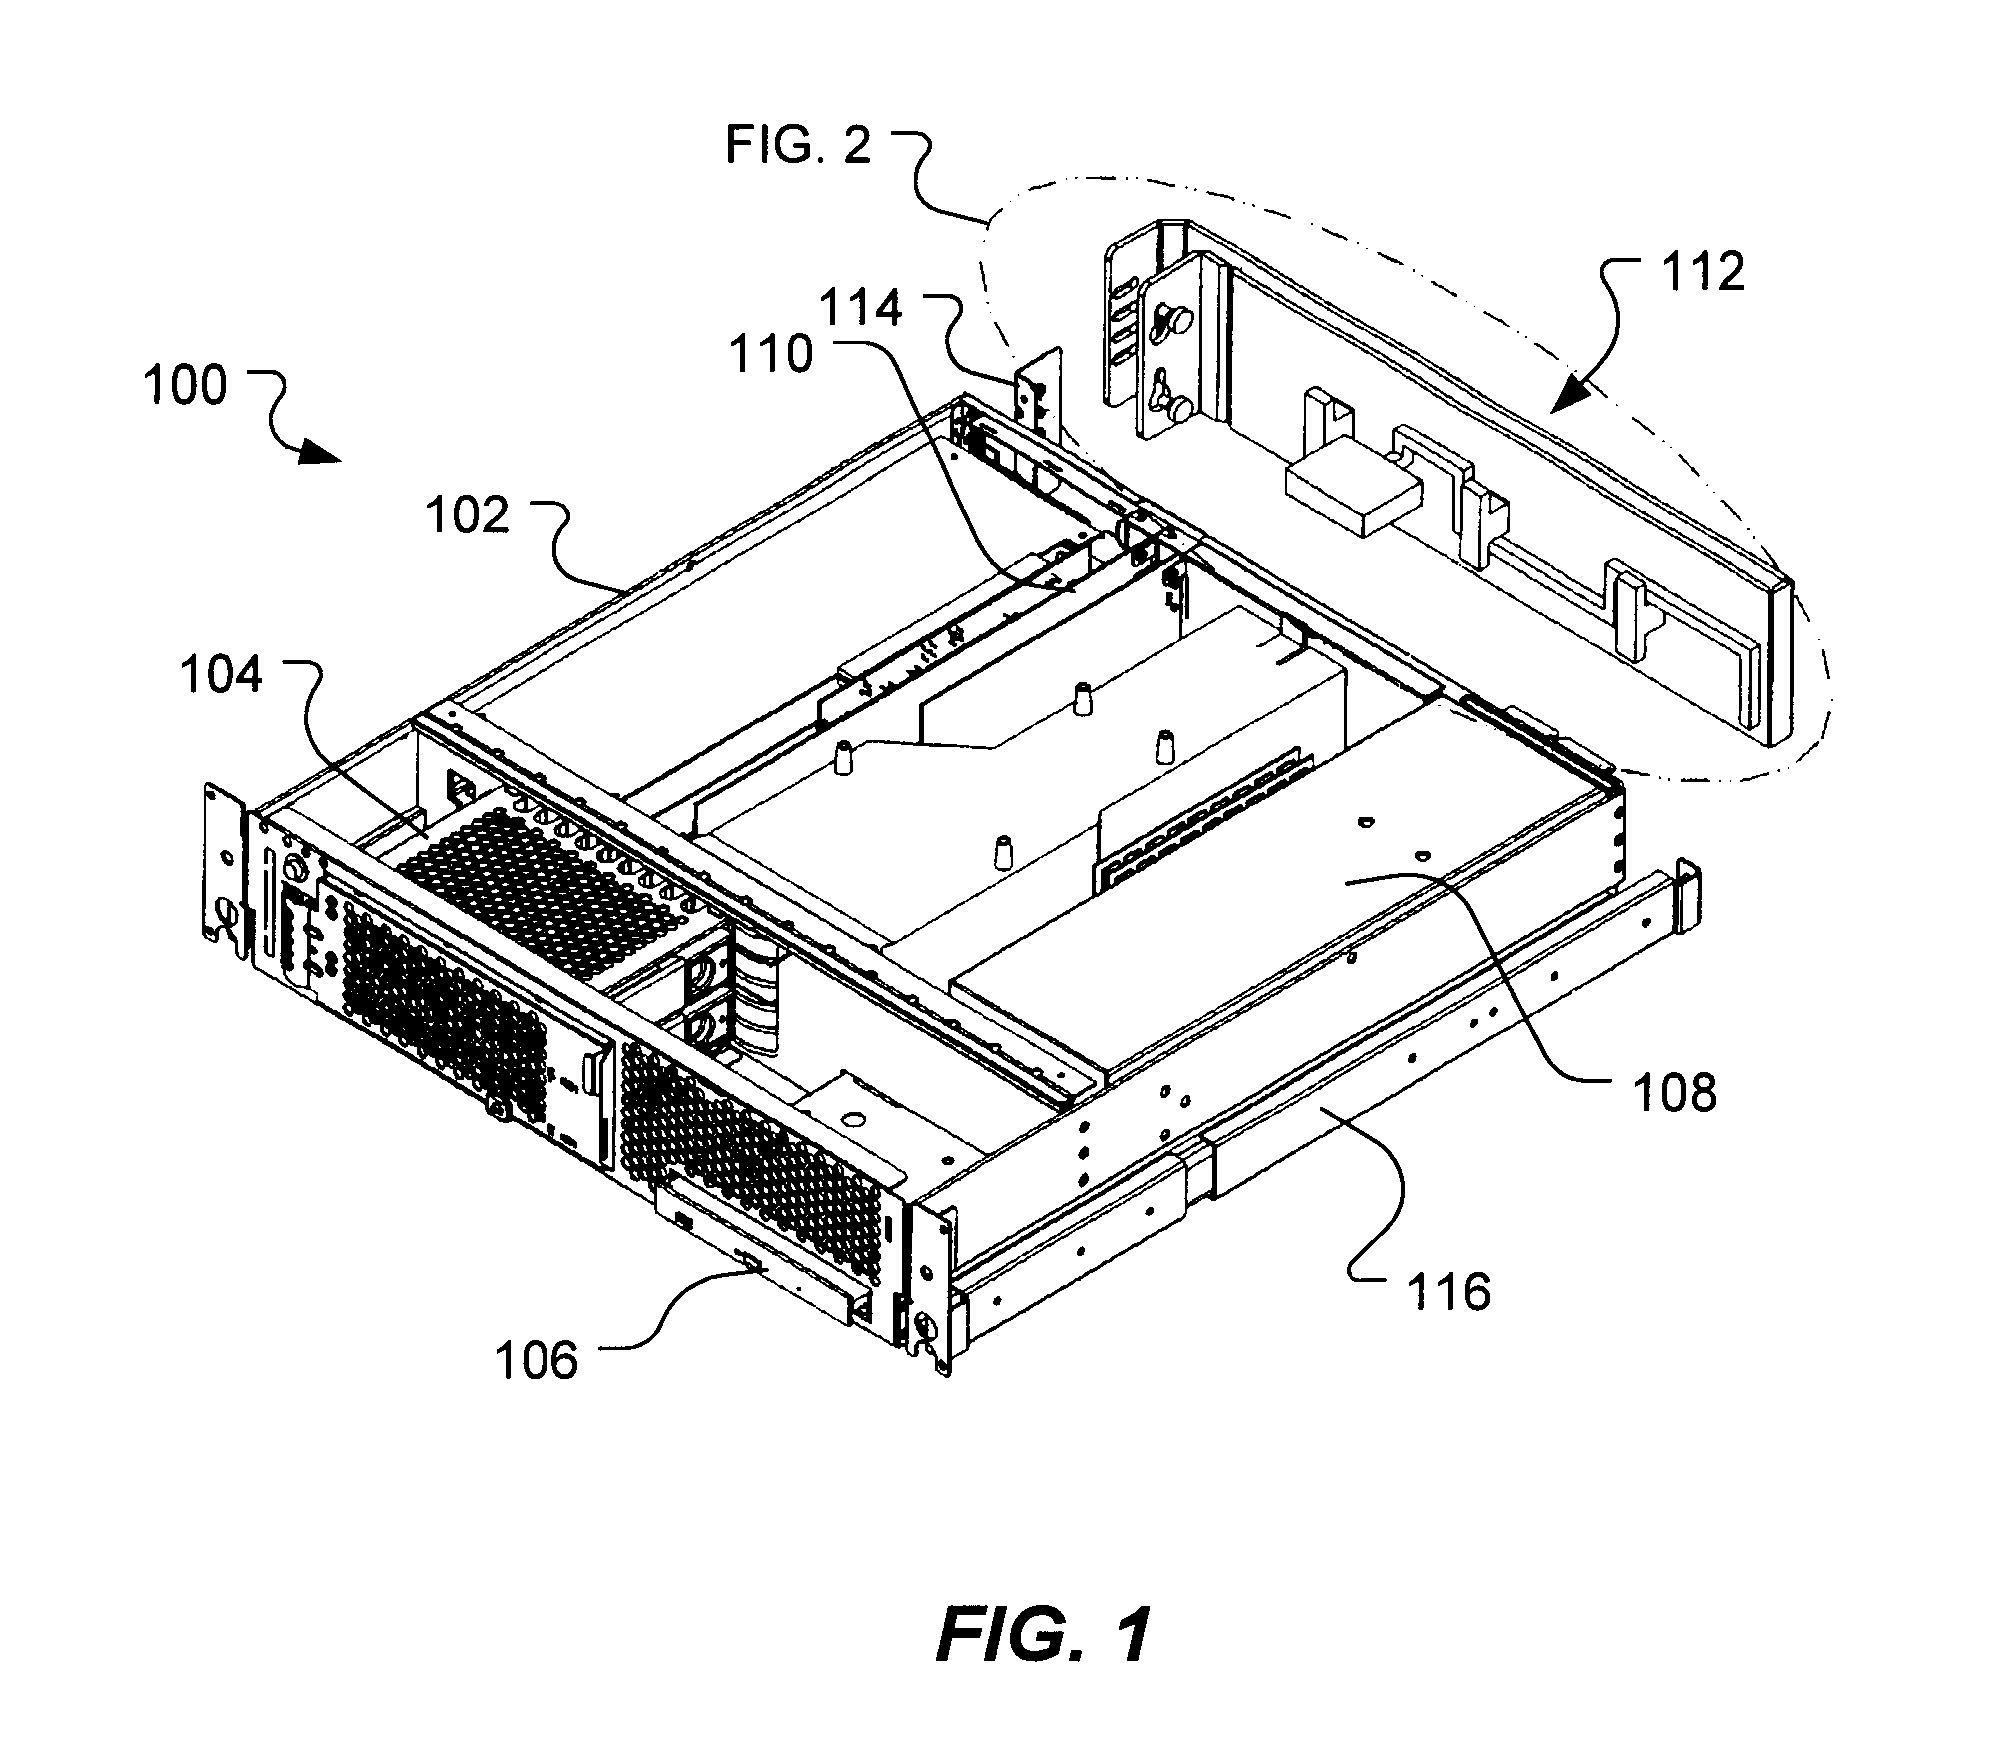 Apparatus and method for routing cables